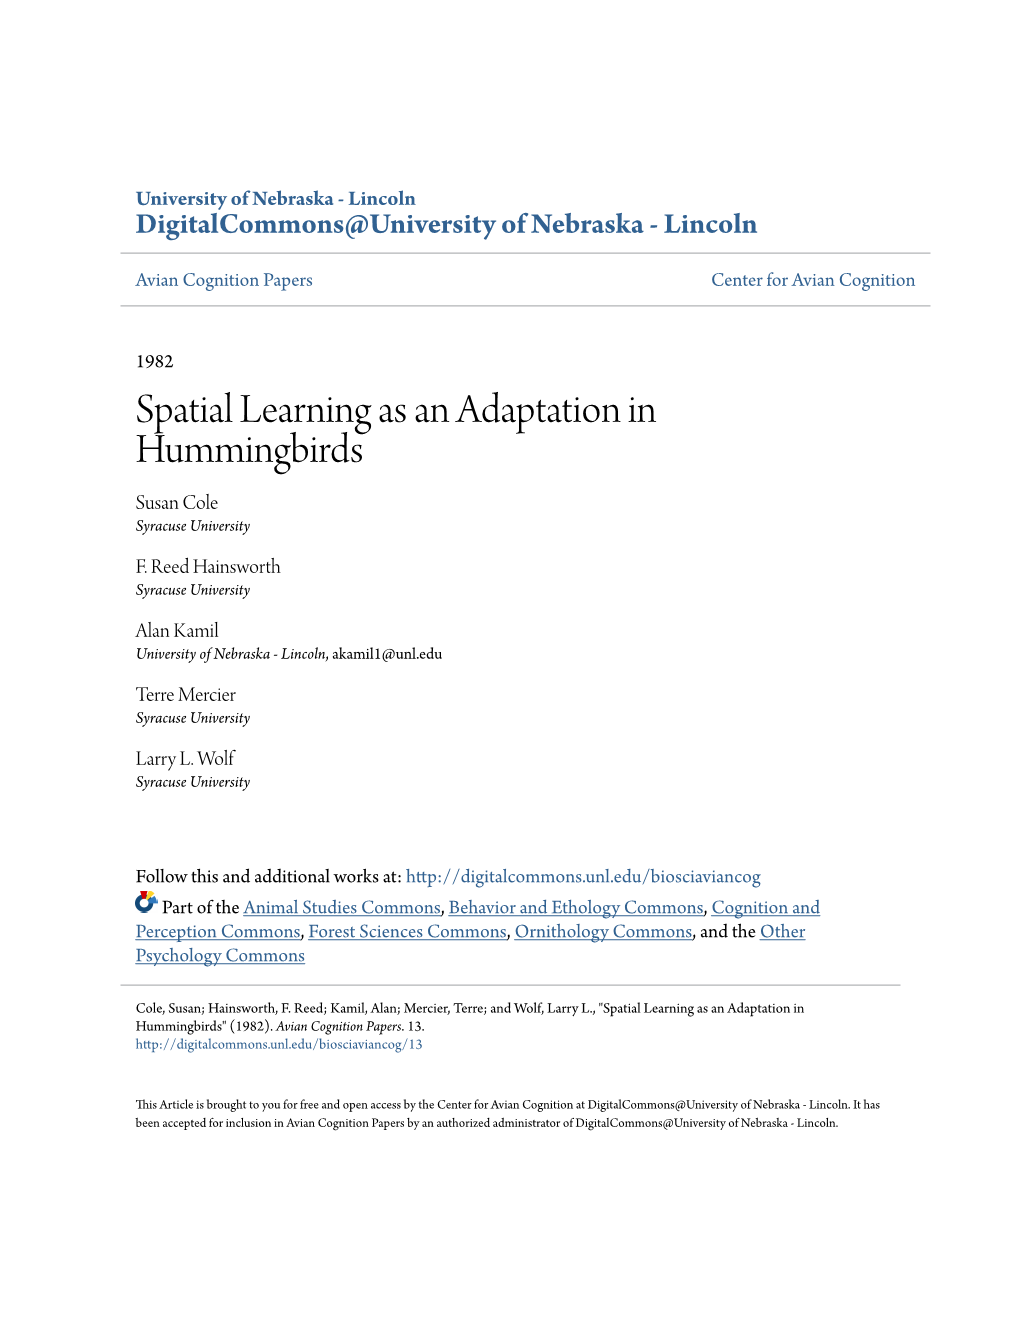 Spatial Learning As an Adaptation in Hummingbirds Susan Cole Syracuse University